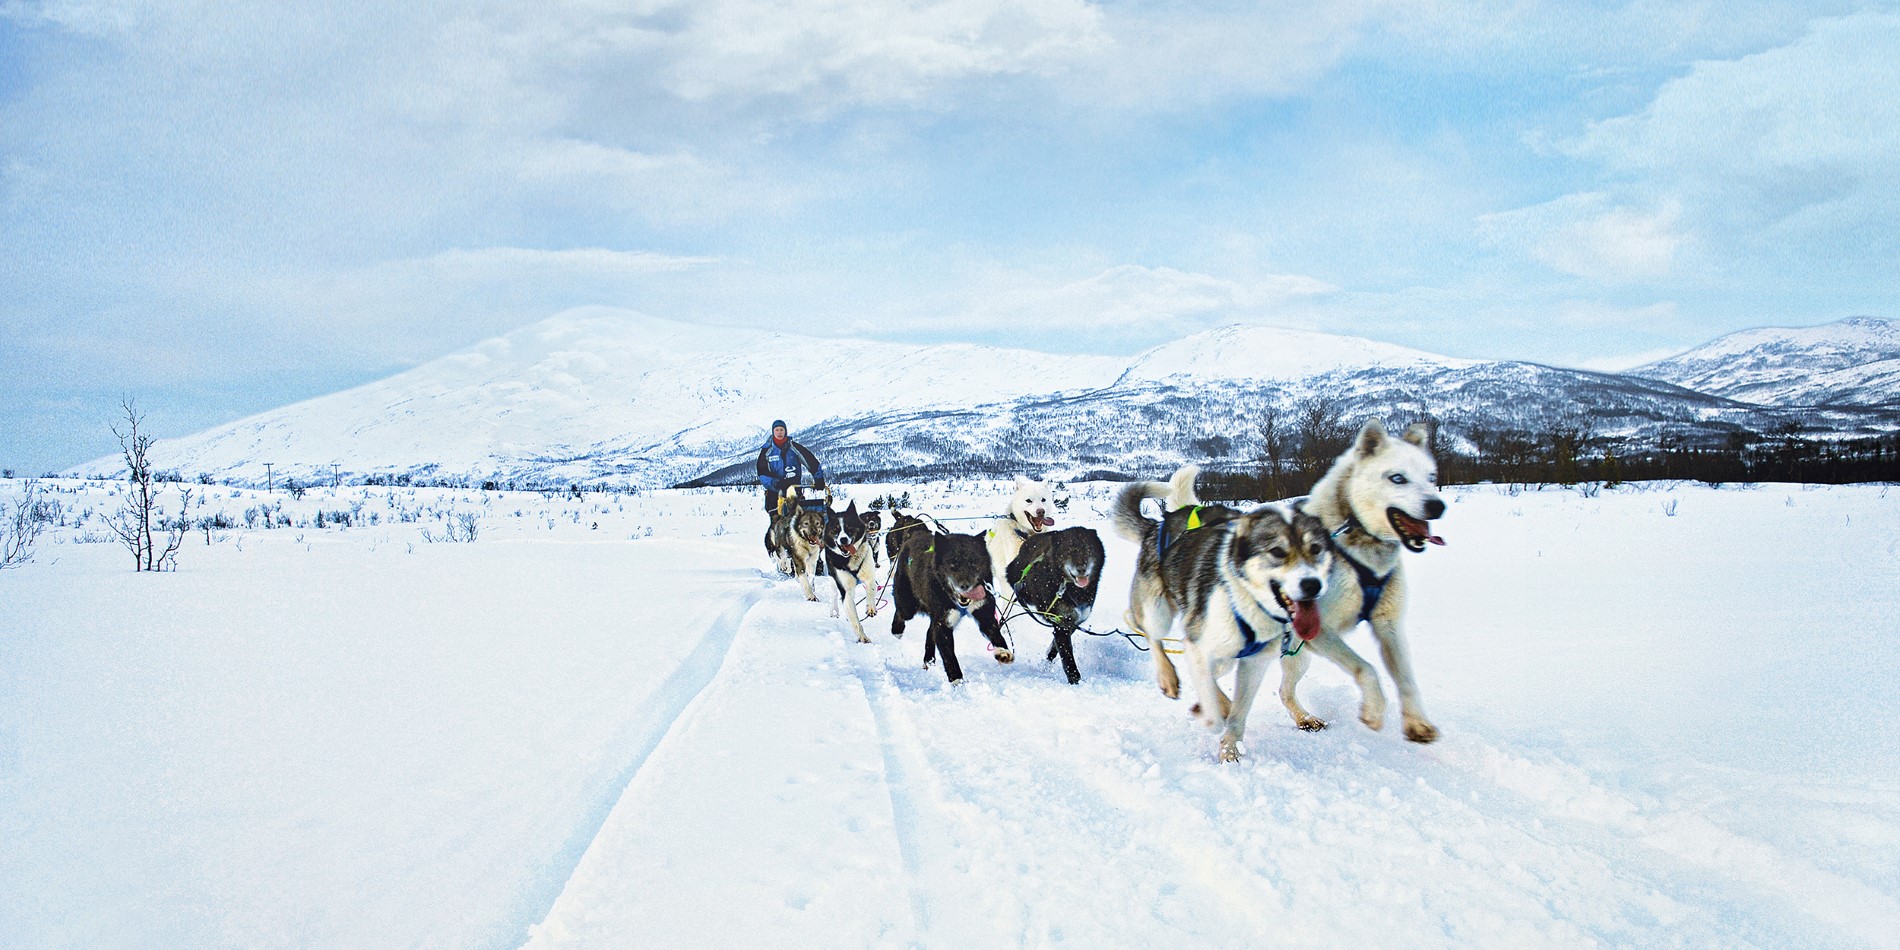 8 huskys in a span, full speed ahead! Its snowy weather and Kvaløya mountains surrounding the dogs.